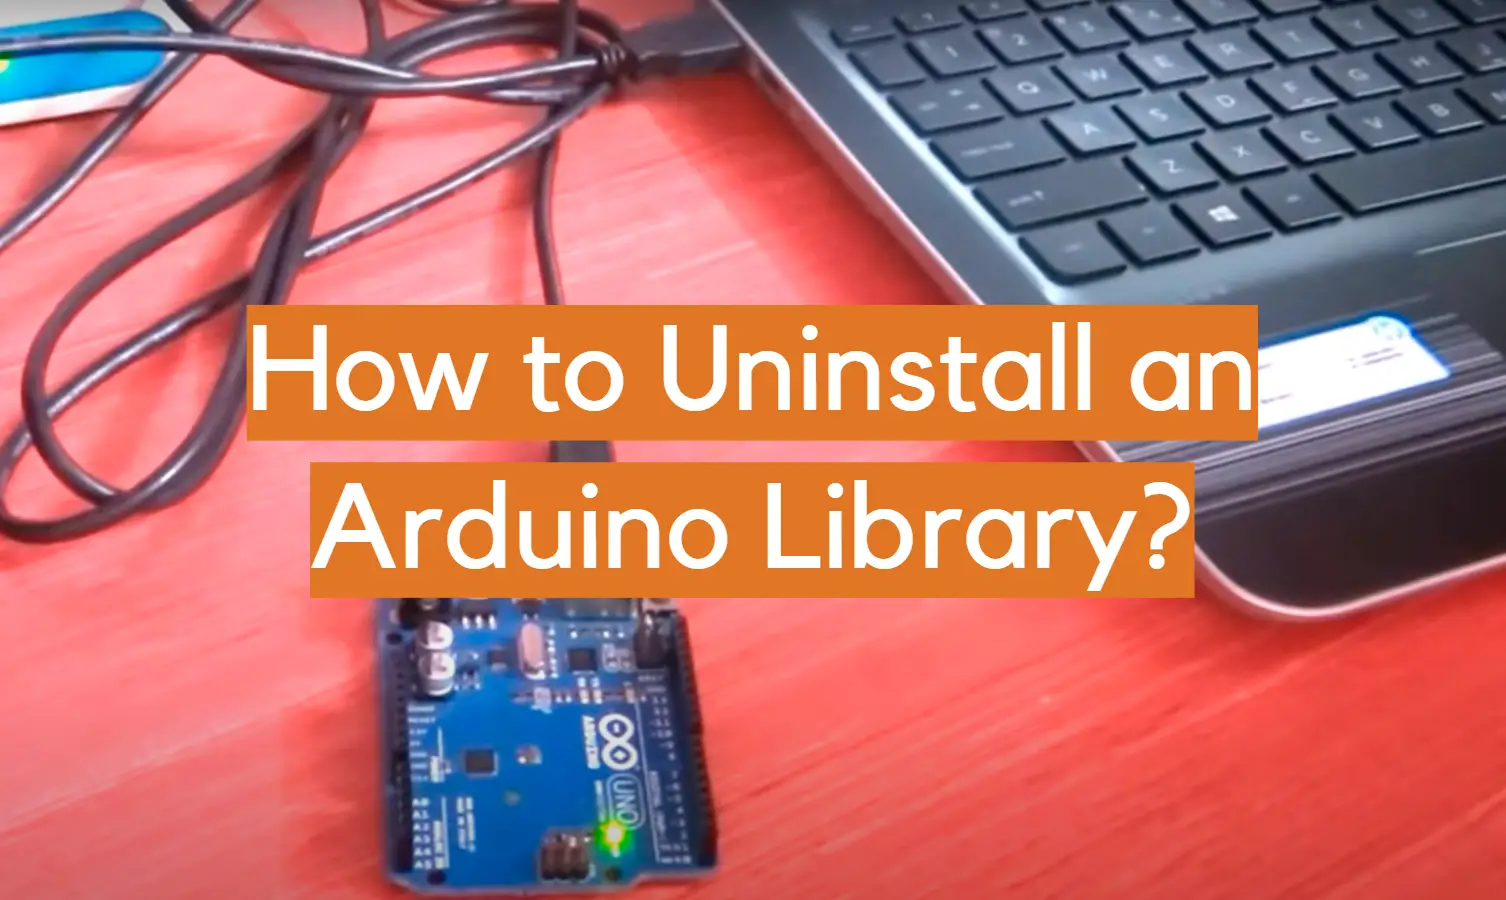 How to Uninstall an Arduino Library?